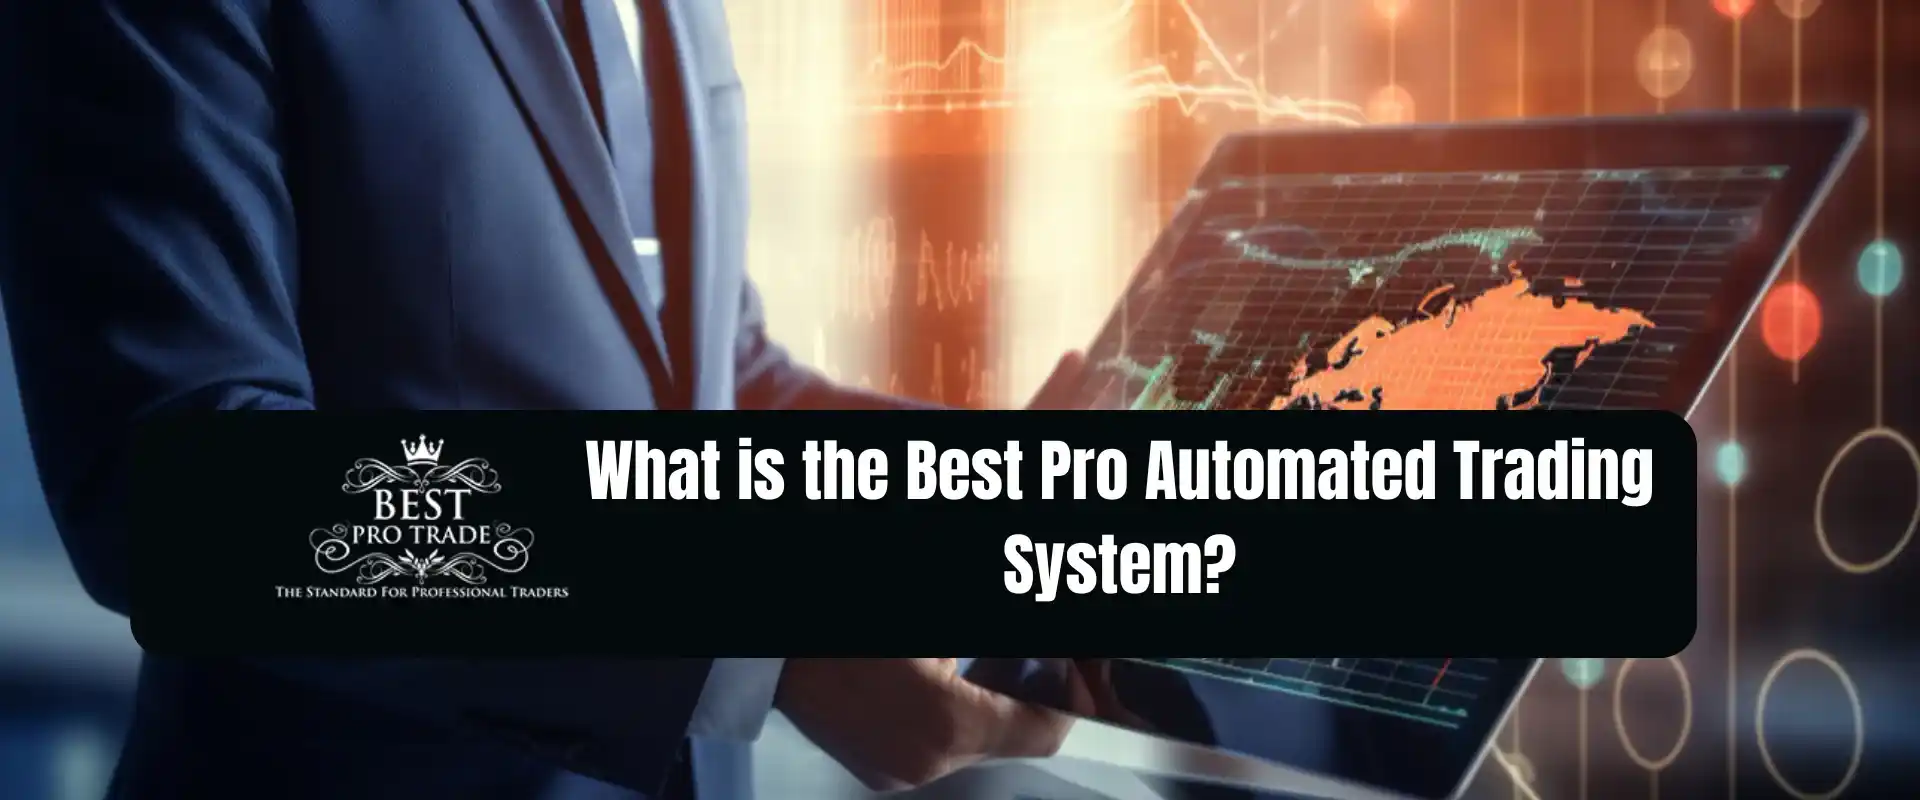 Pro Automated Trading System